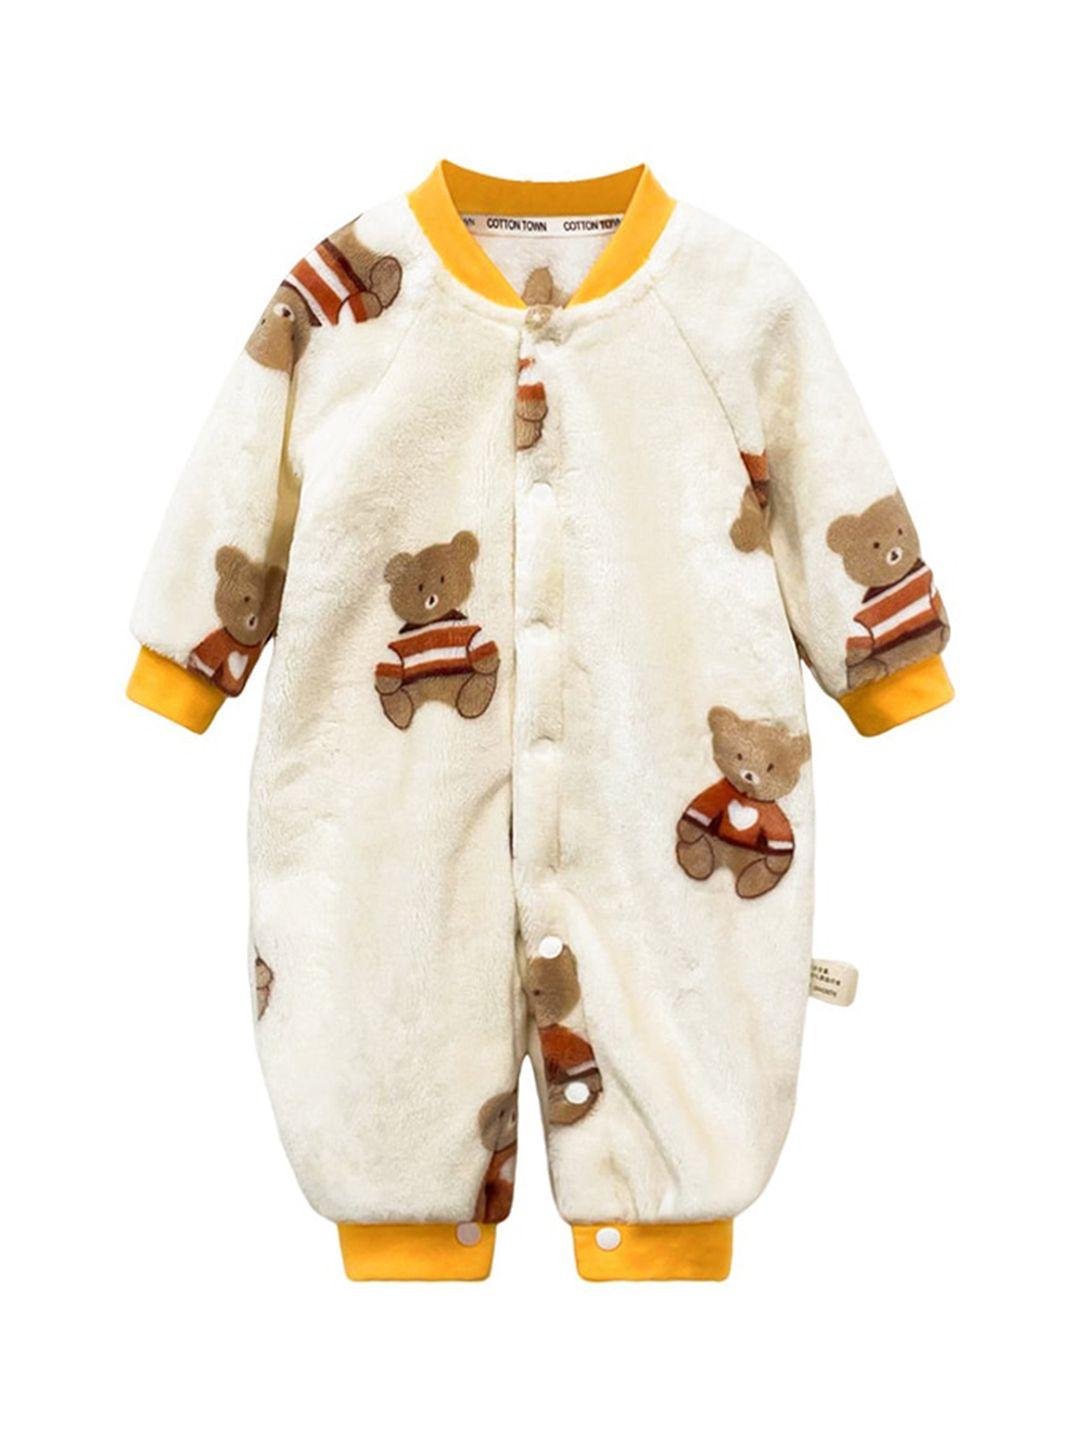 stylecast infant boys yellow graphic printed rompers